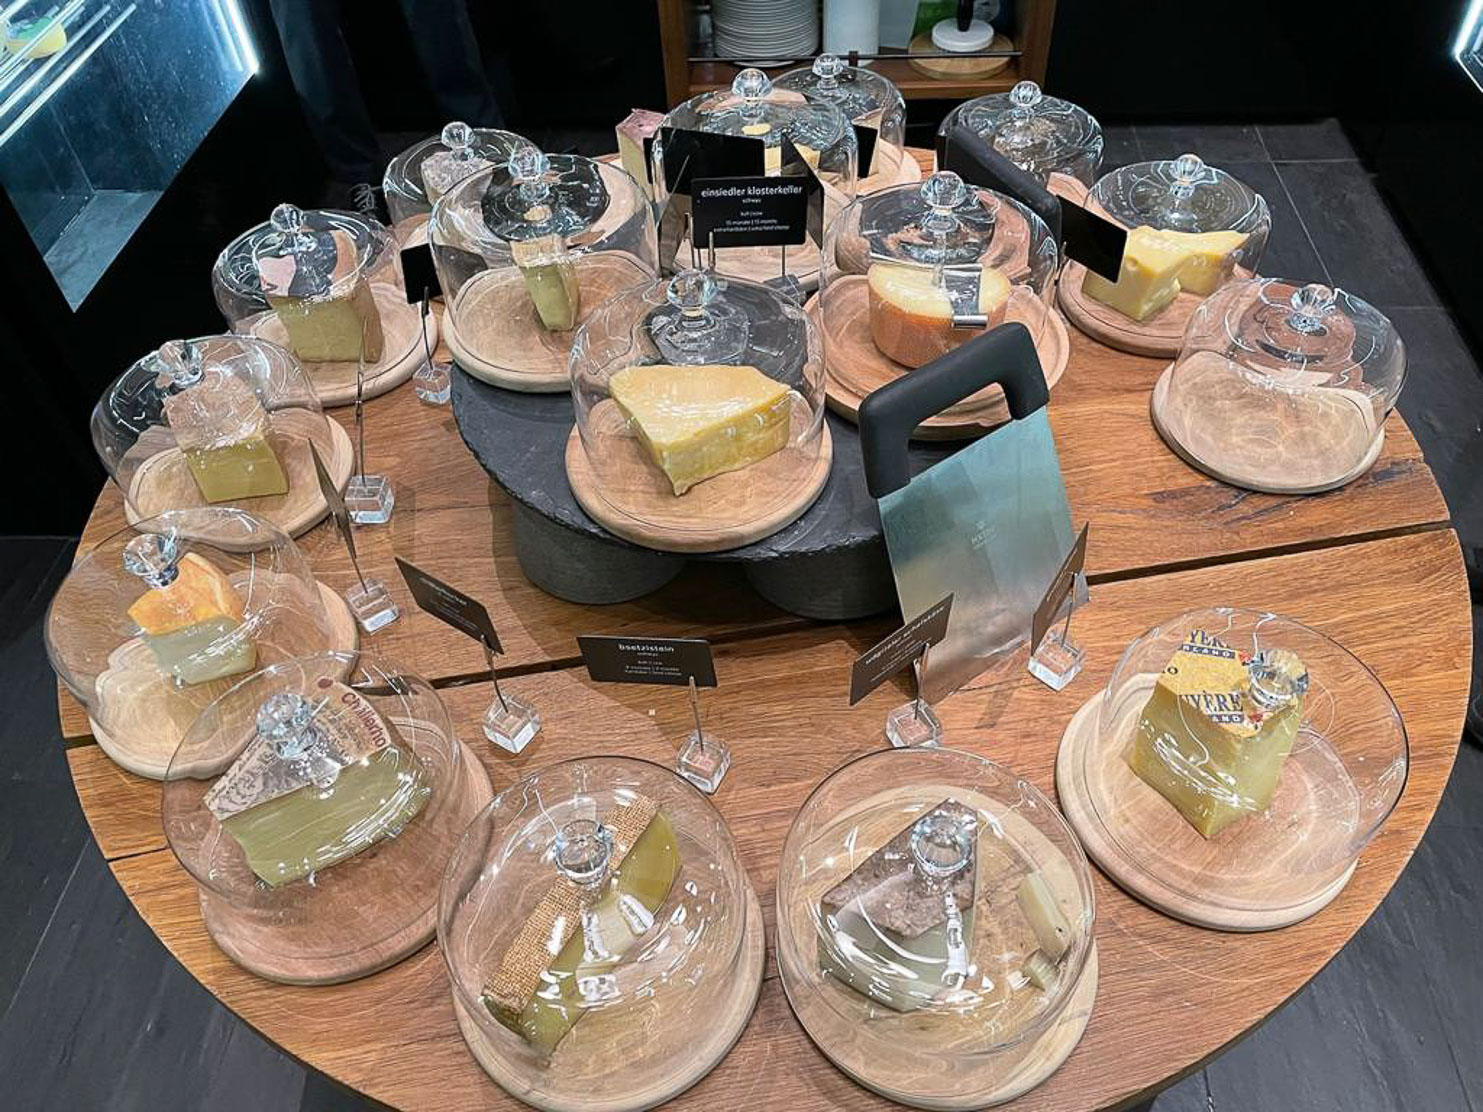 The Chedi Andermatt Daily assortment of delicious Swiss cheeses displayed at breakfast